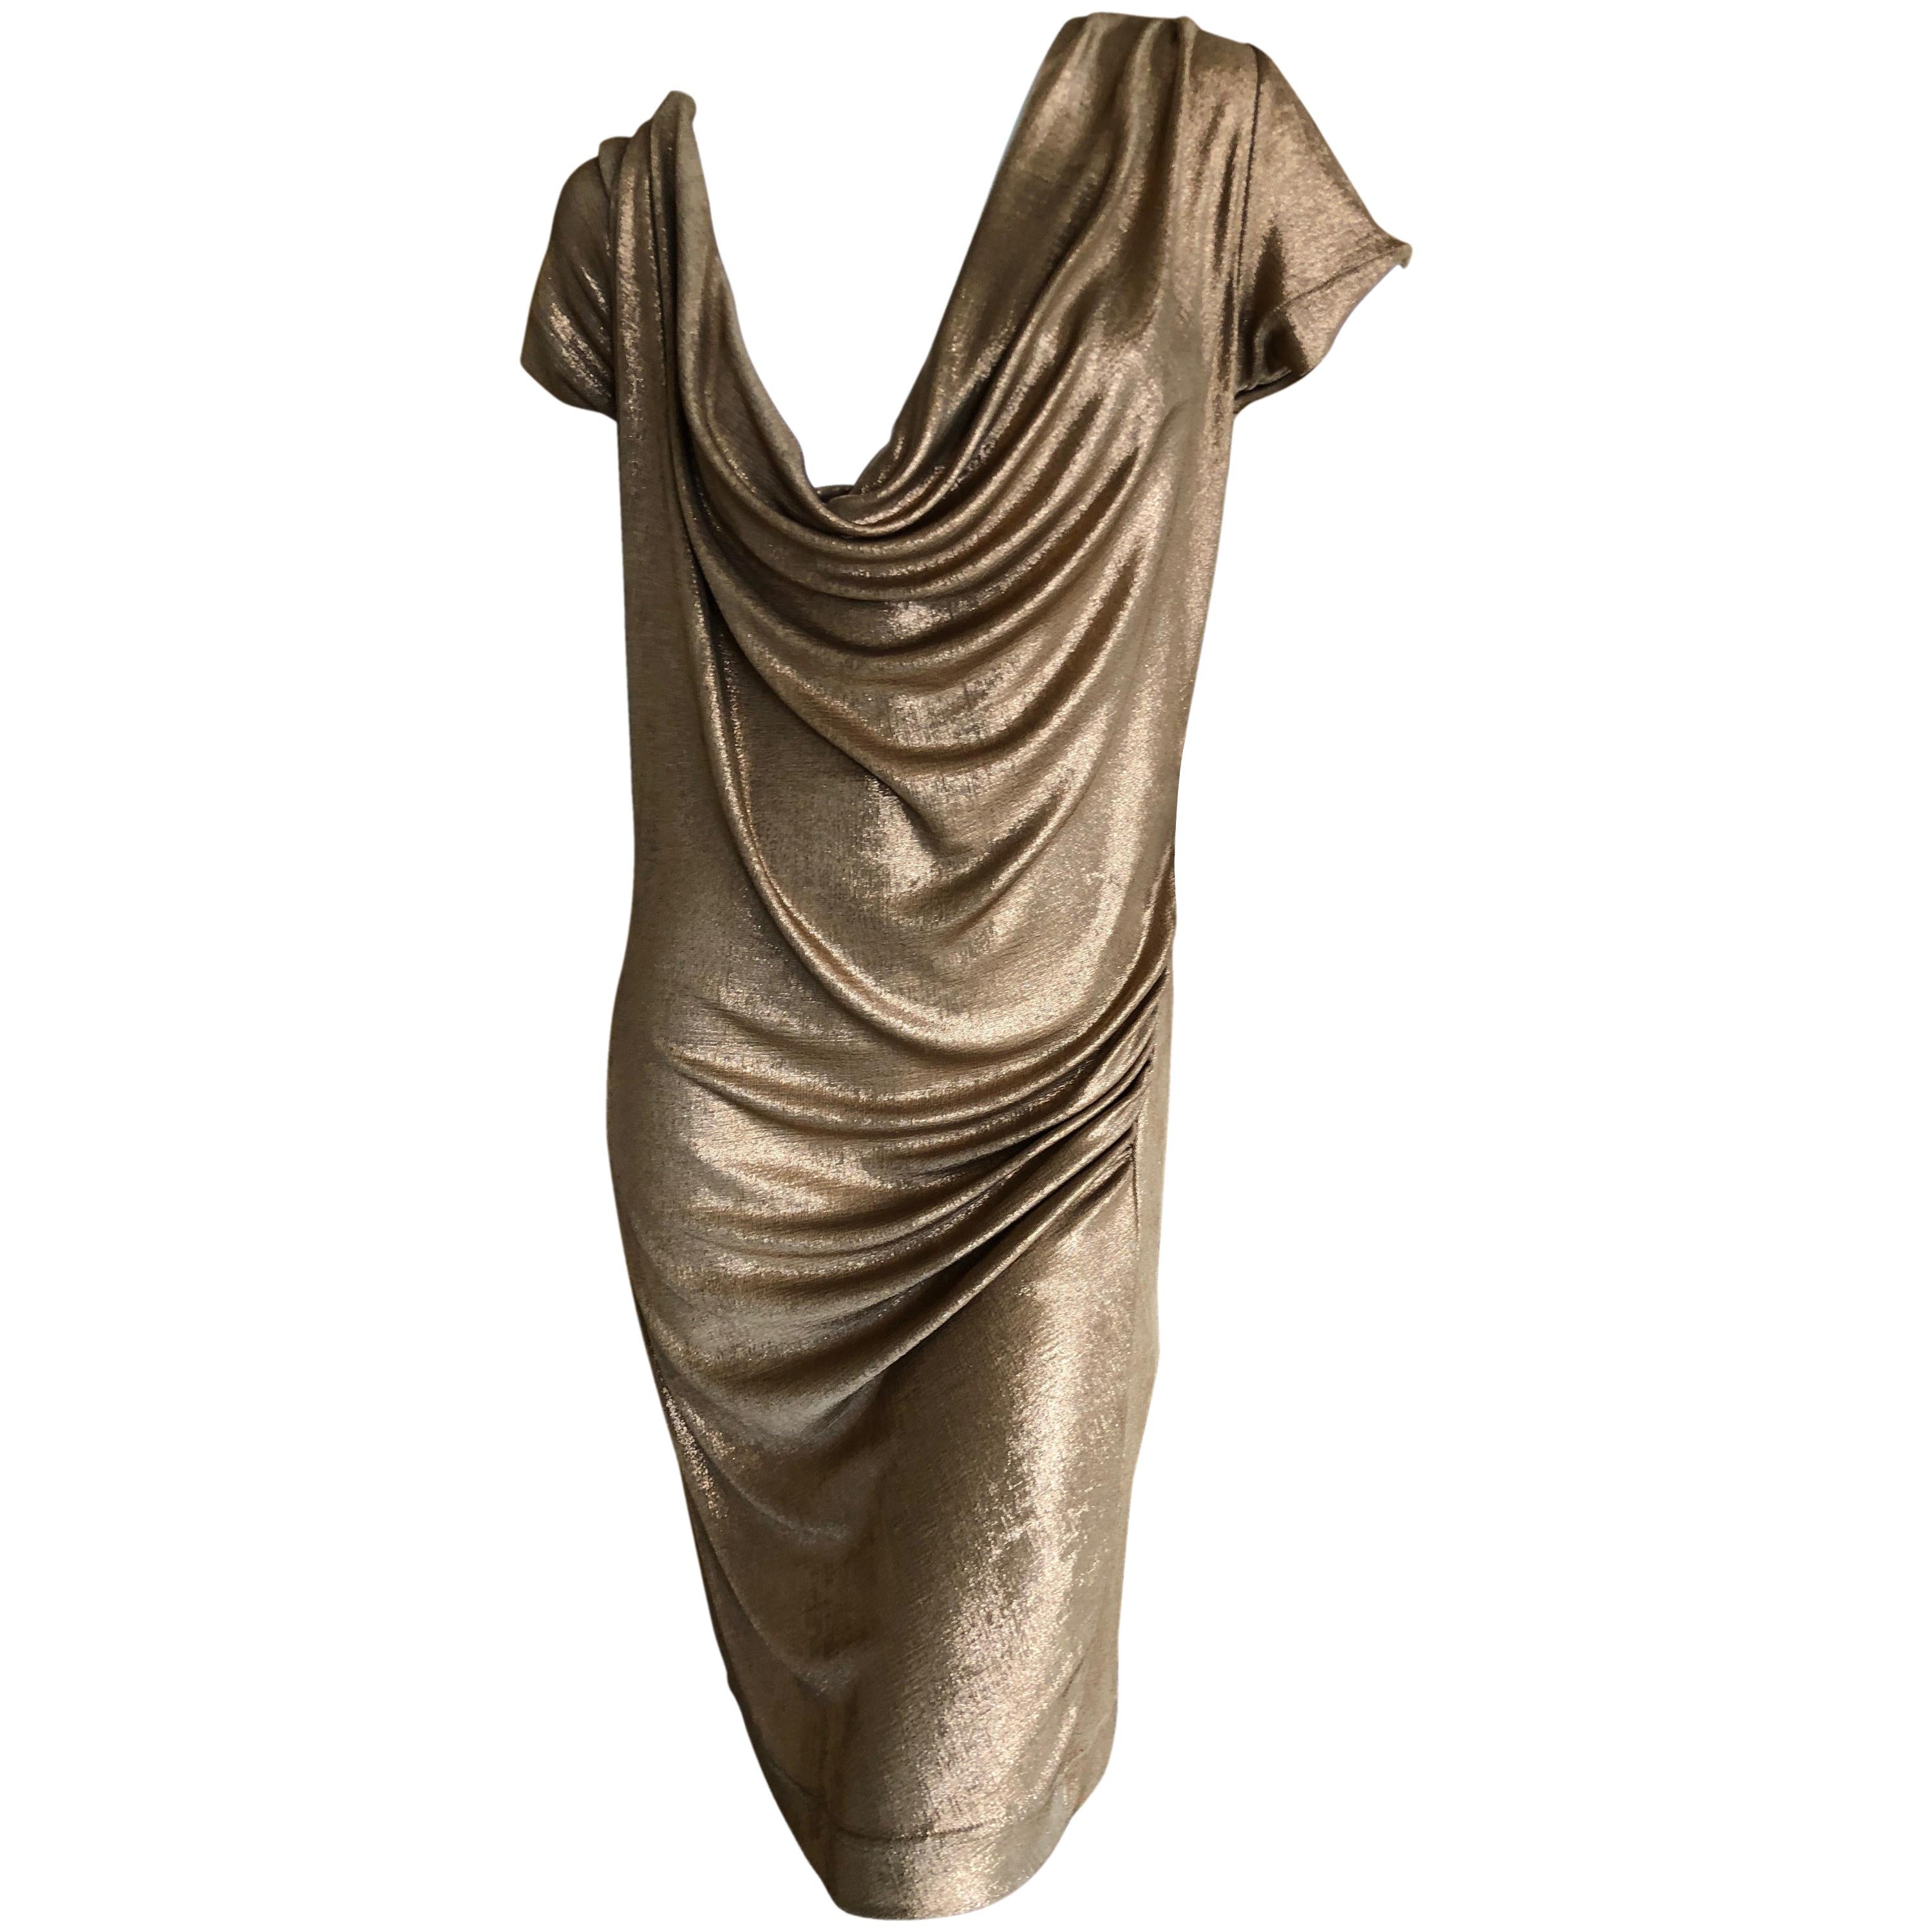 Vivienne Westwood Anglomania Metallic Copper Draped Dress Size L at 1stDibs